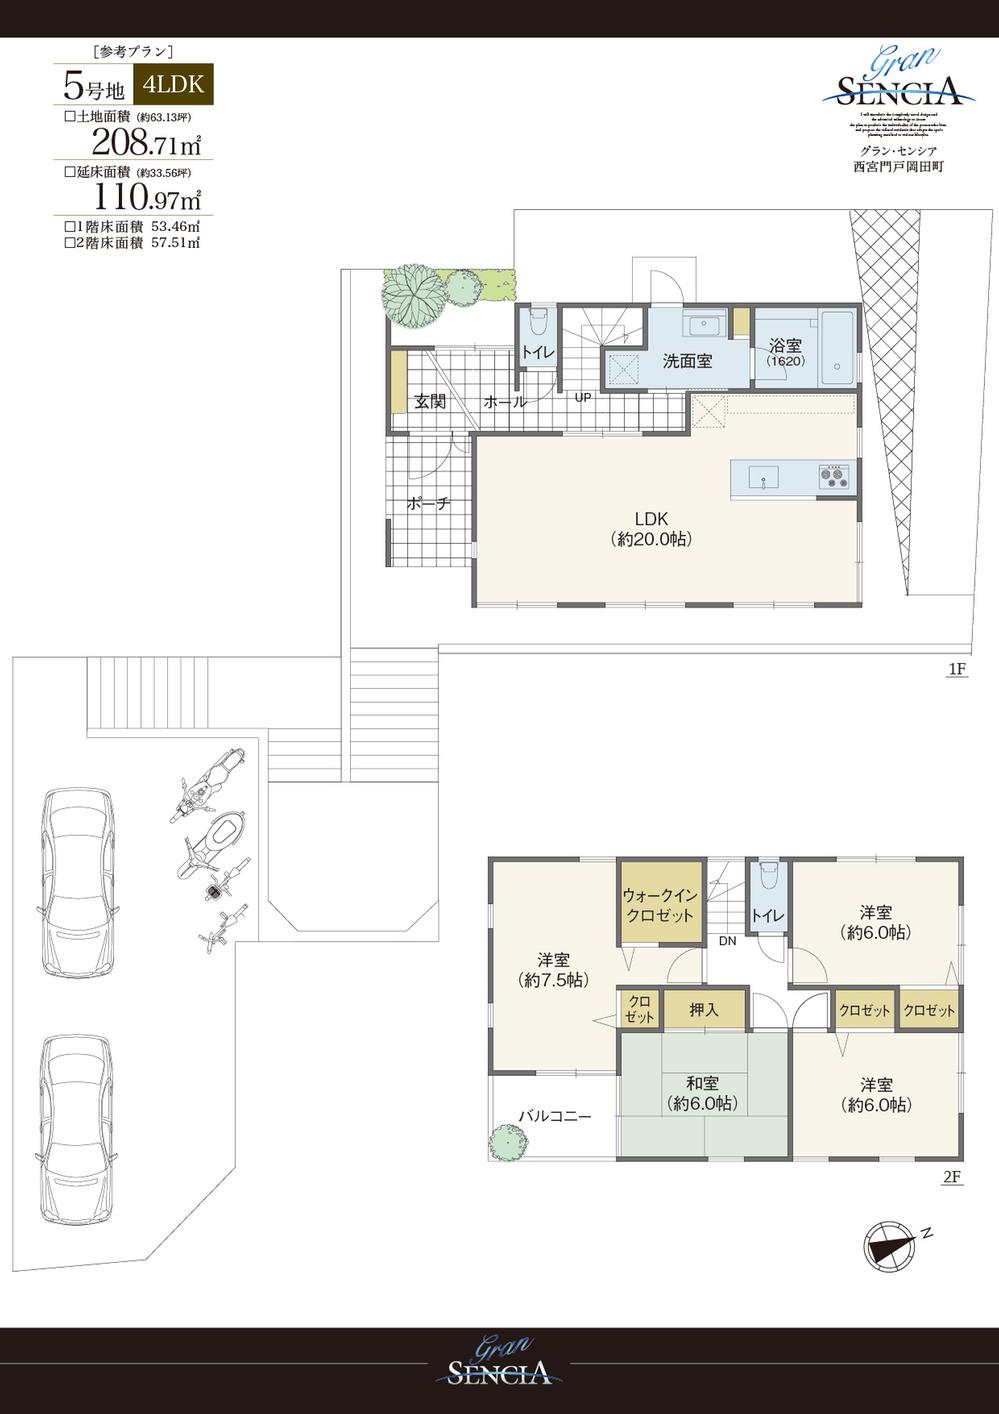 Compartment view + building plan example. Building plan example (No. 5 place reference plan) 4LDK, Land price 39,980,000 yen, Land area 208.71 sq m , Building price 17,820,000 yen, Building area 110.97 sq m